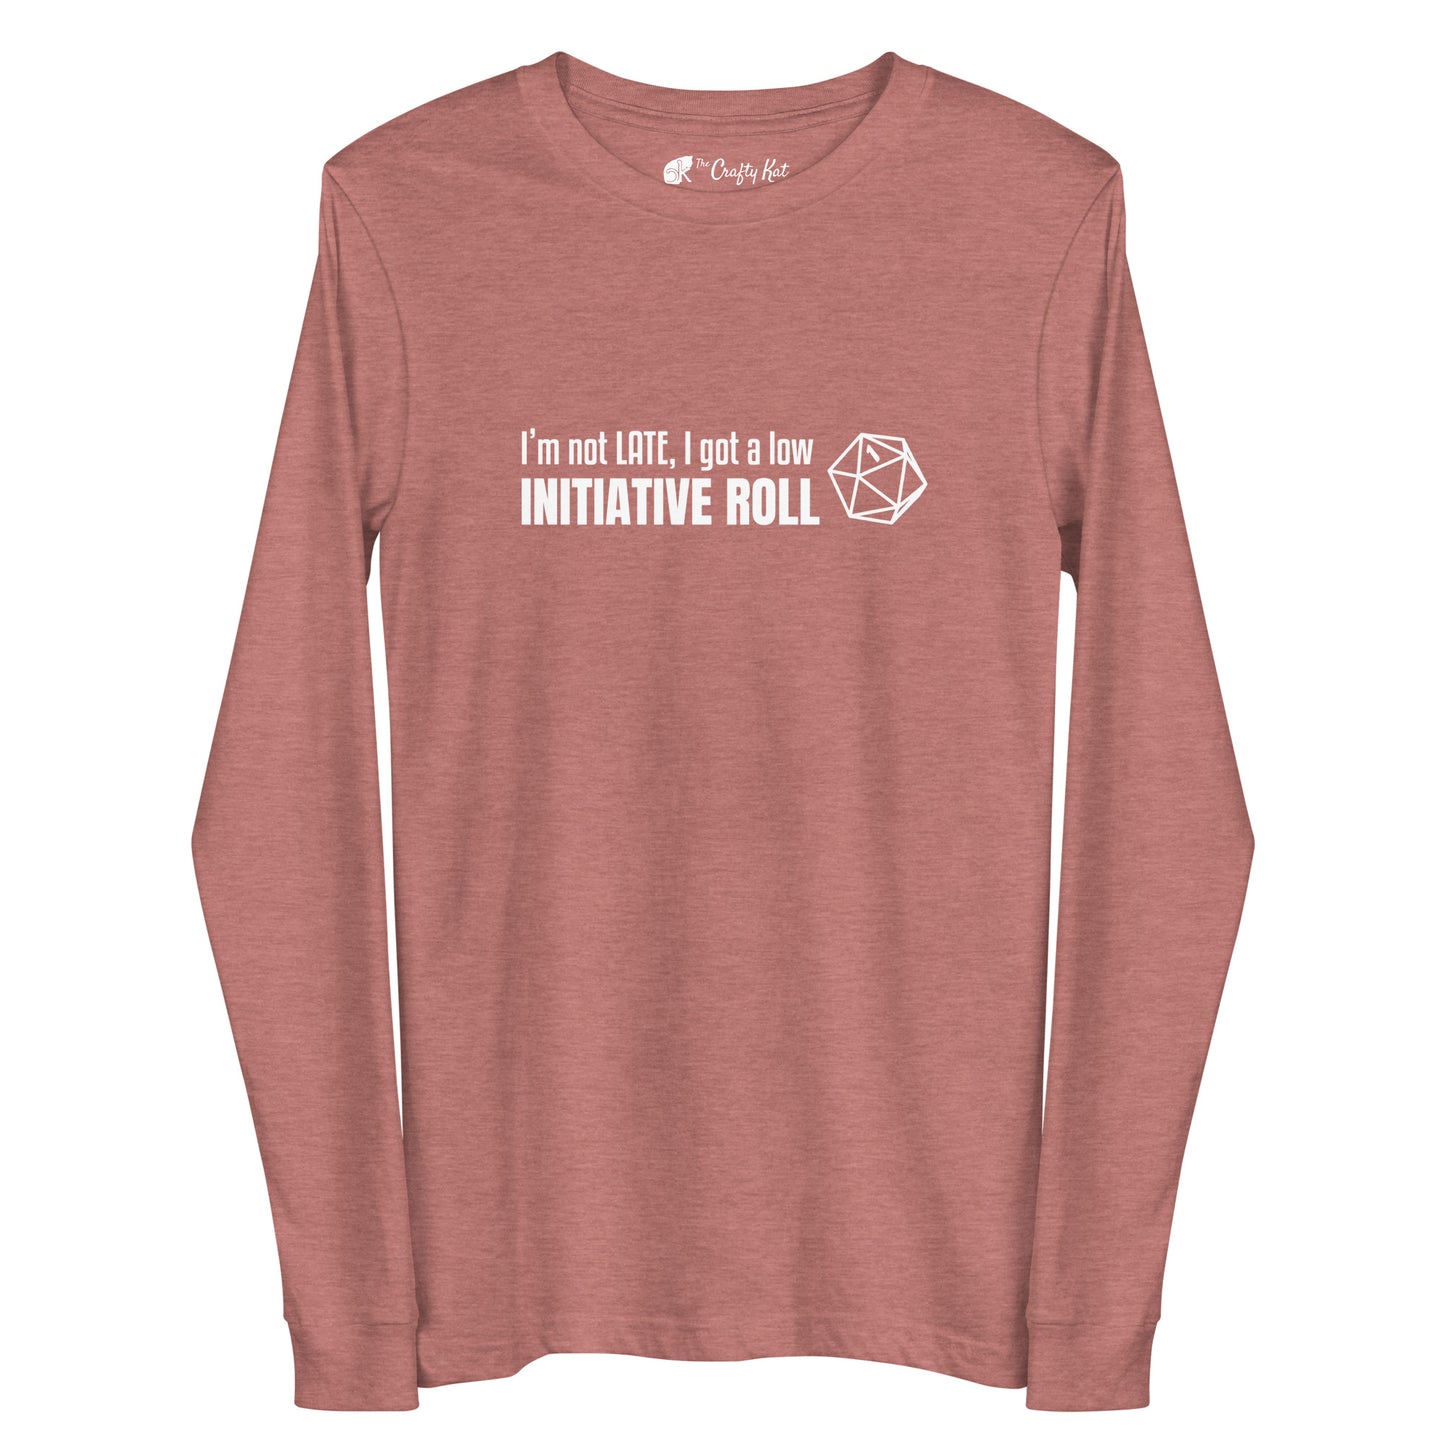 Heather Mauve long-sleeve tee with a graphic of a d20 (twenty-sided die) showing a roll of "1" and text: "I'm not LATE, I got a low INITIATIVE ROLL"